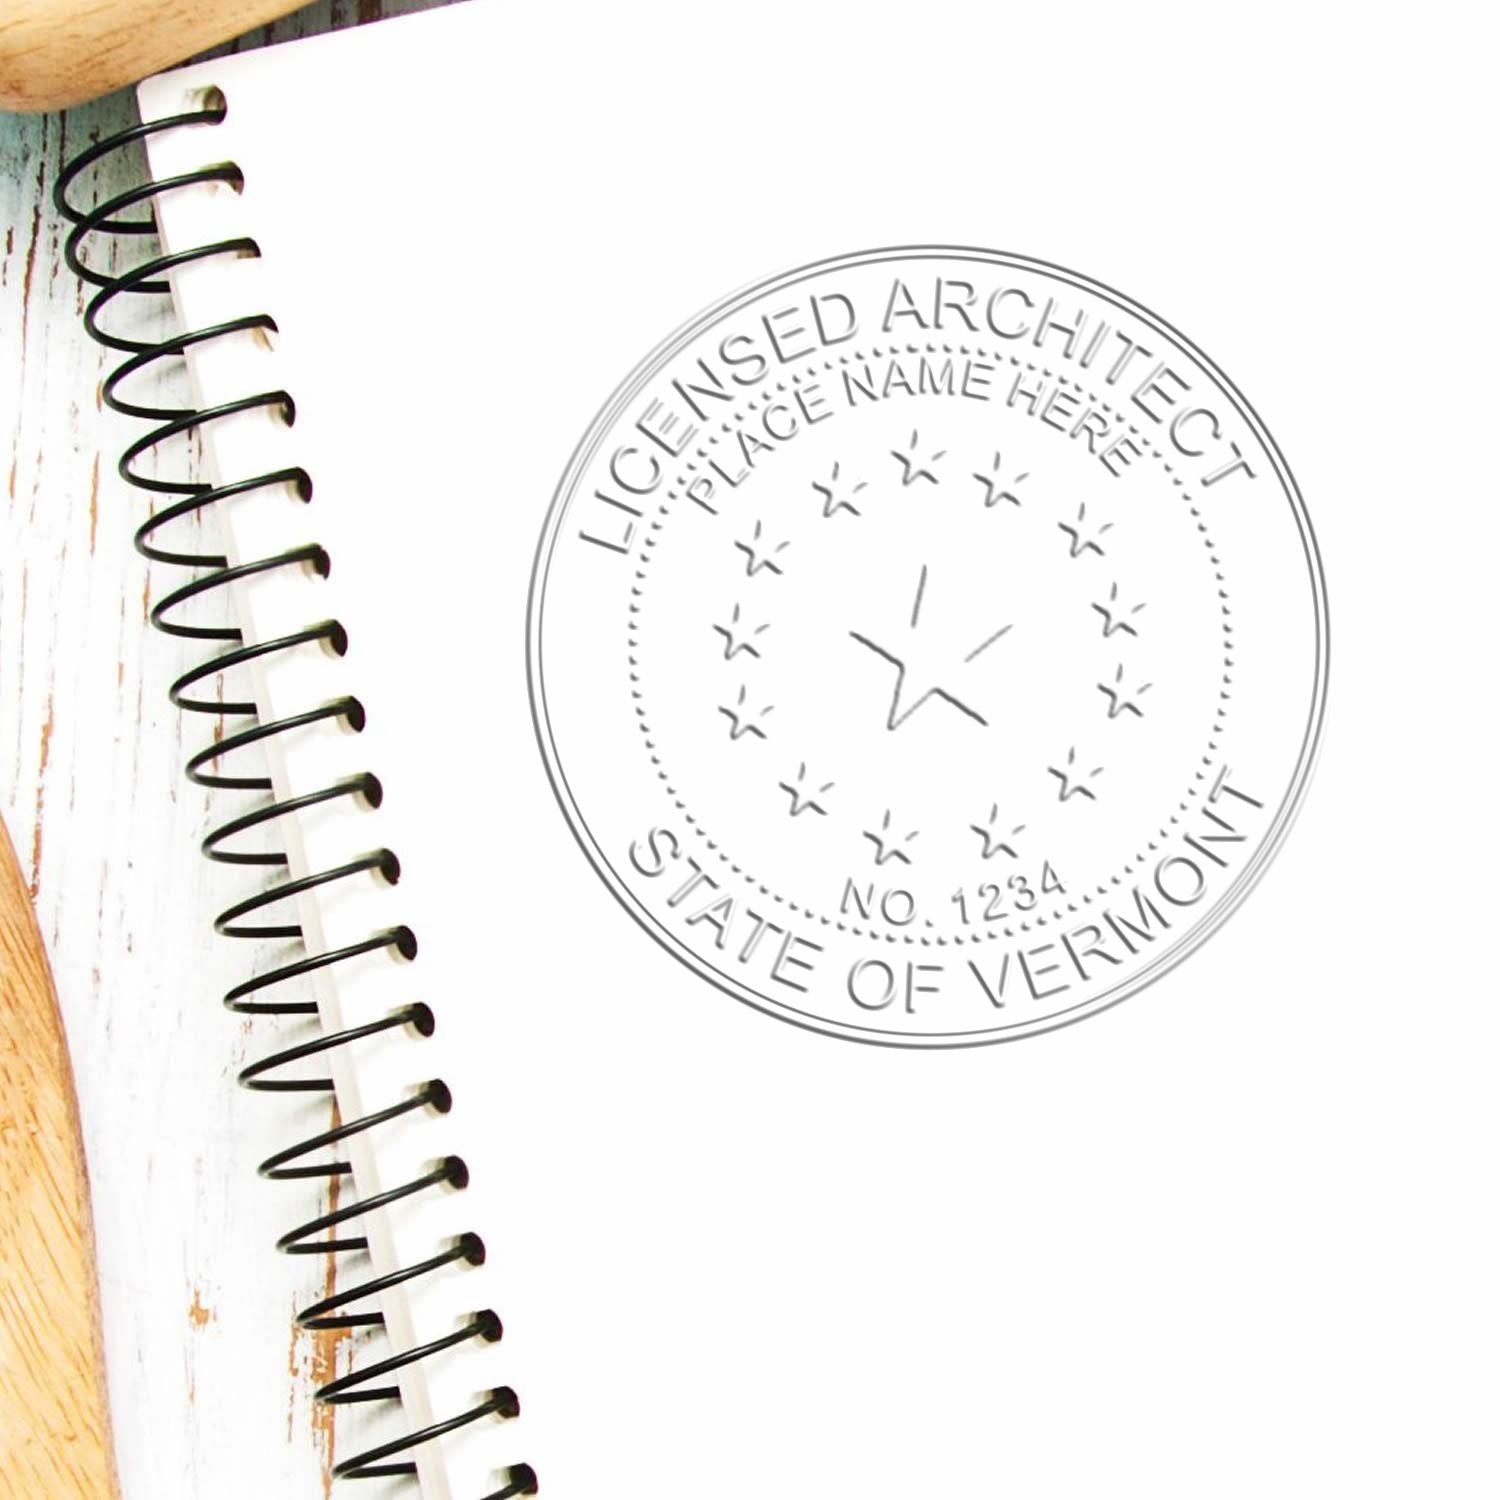 The main image for the Vermont Desk Architect Embossing Seal depicting a sample of the imprint and electronic files